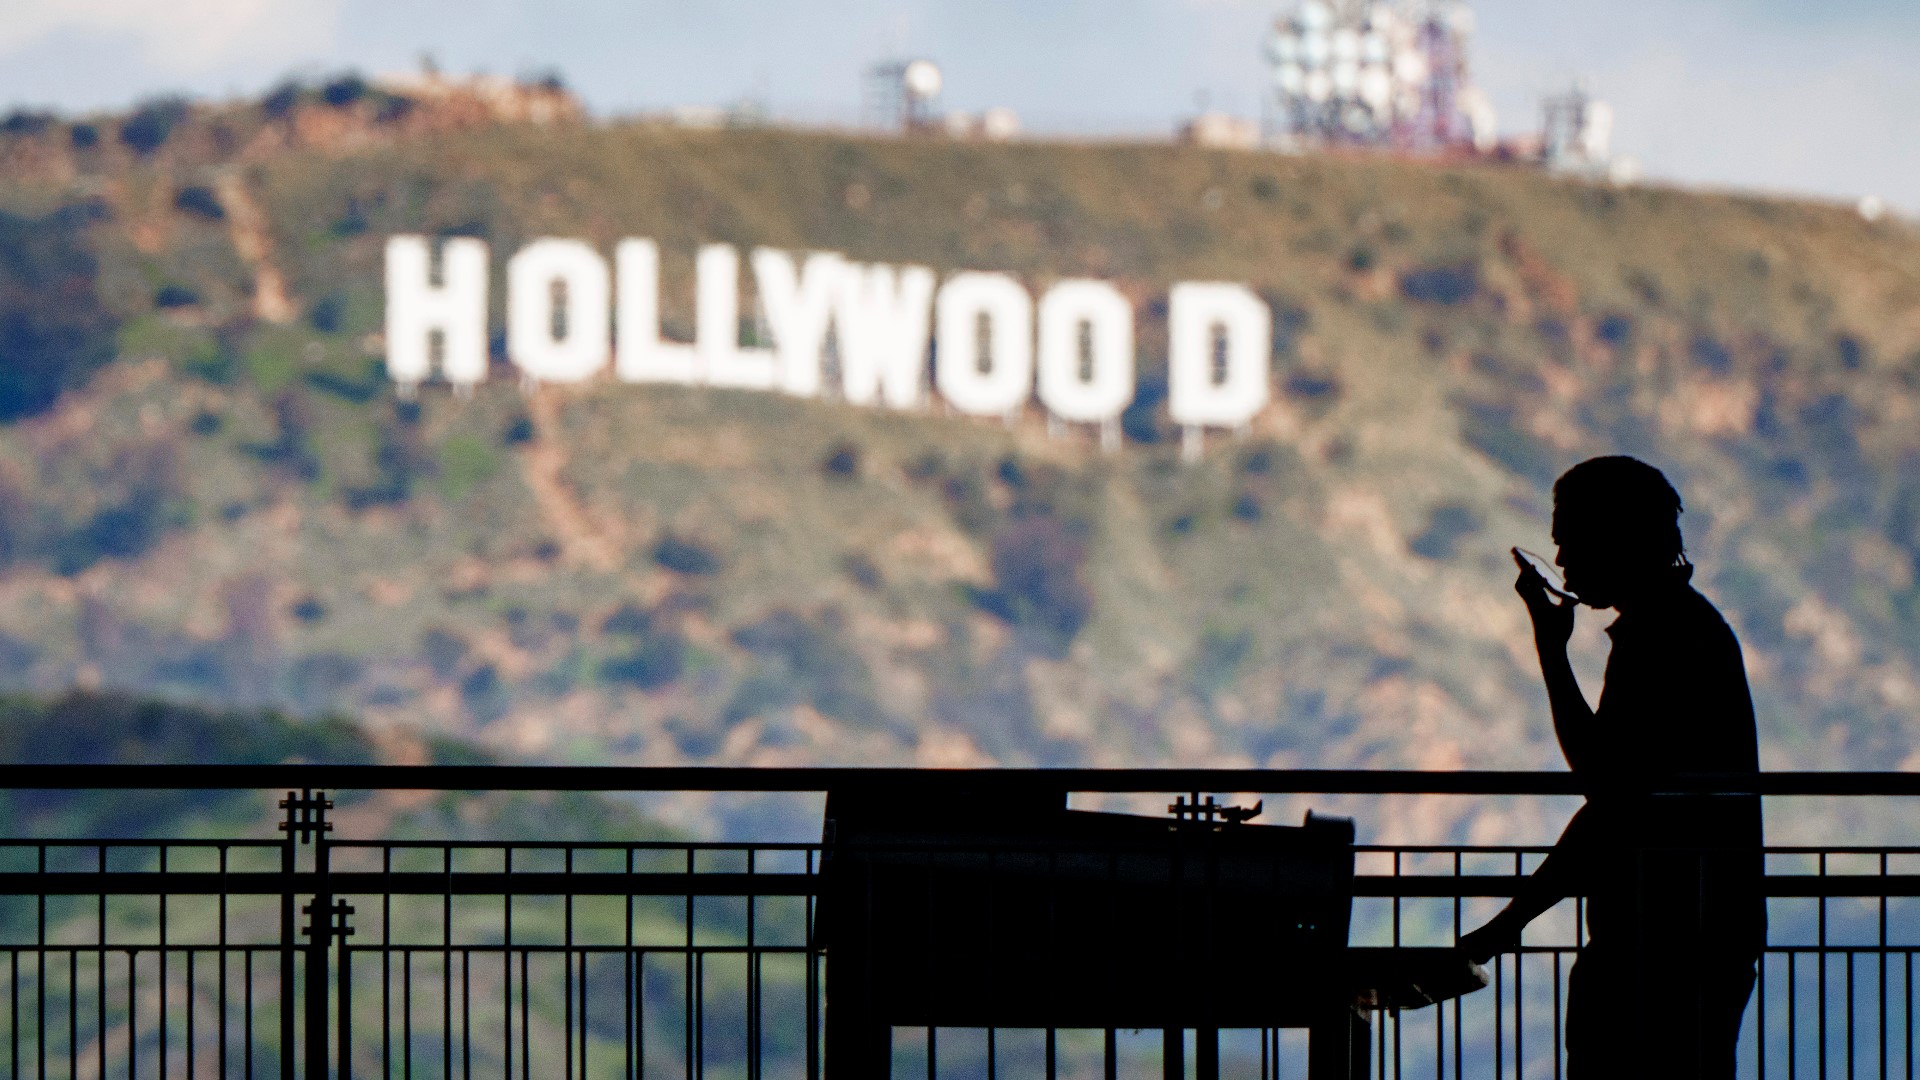 Television and movie writers soured by Hollywood’s low pay in the streaming era went on strike for the first time in 15 years on Tuesday.